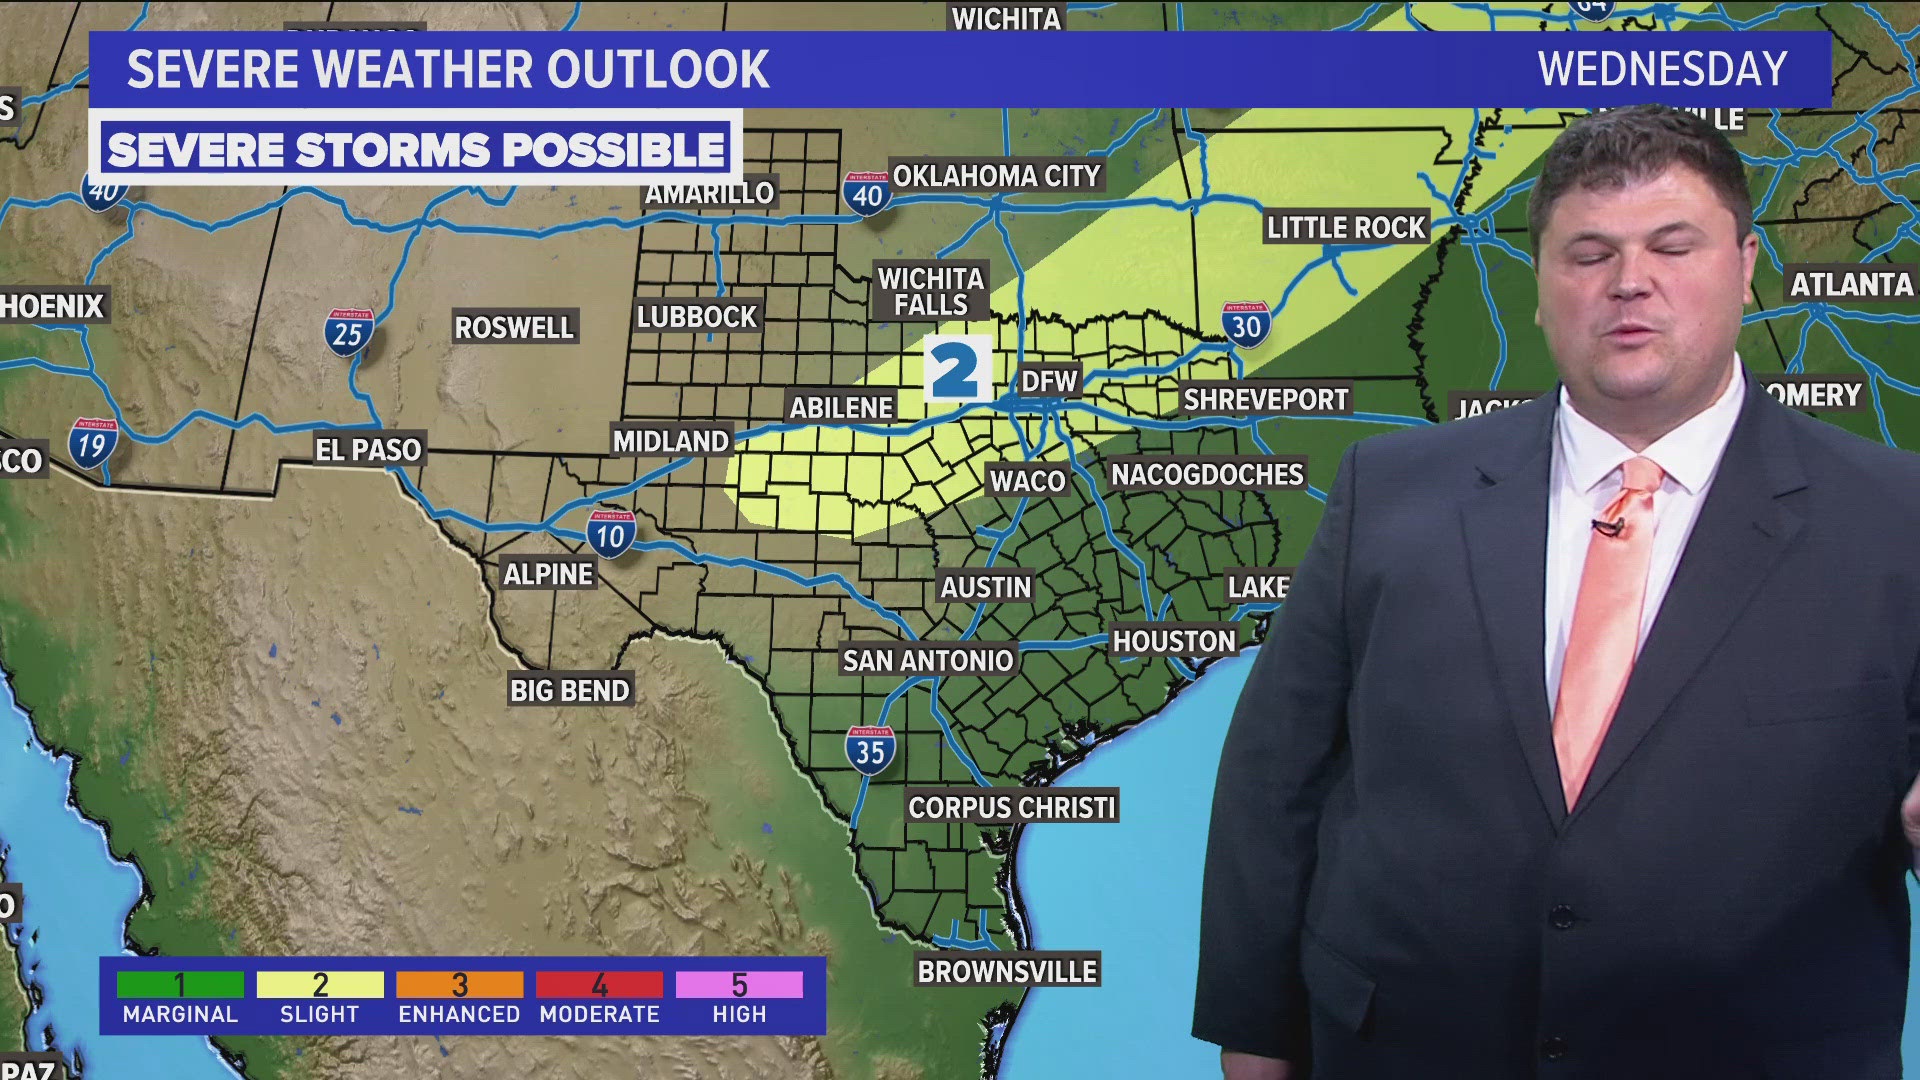 There is a slight risk for severe thunderstorms in place on Wednesday for much of North Texas.